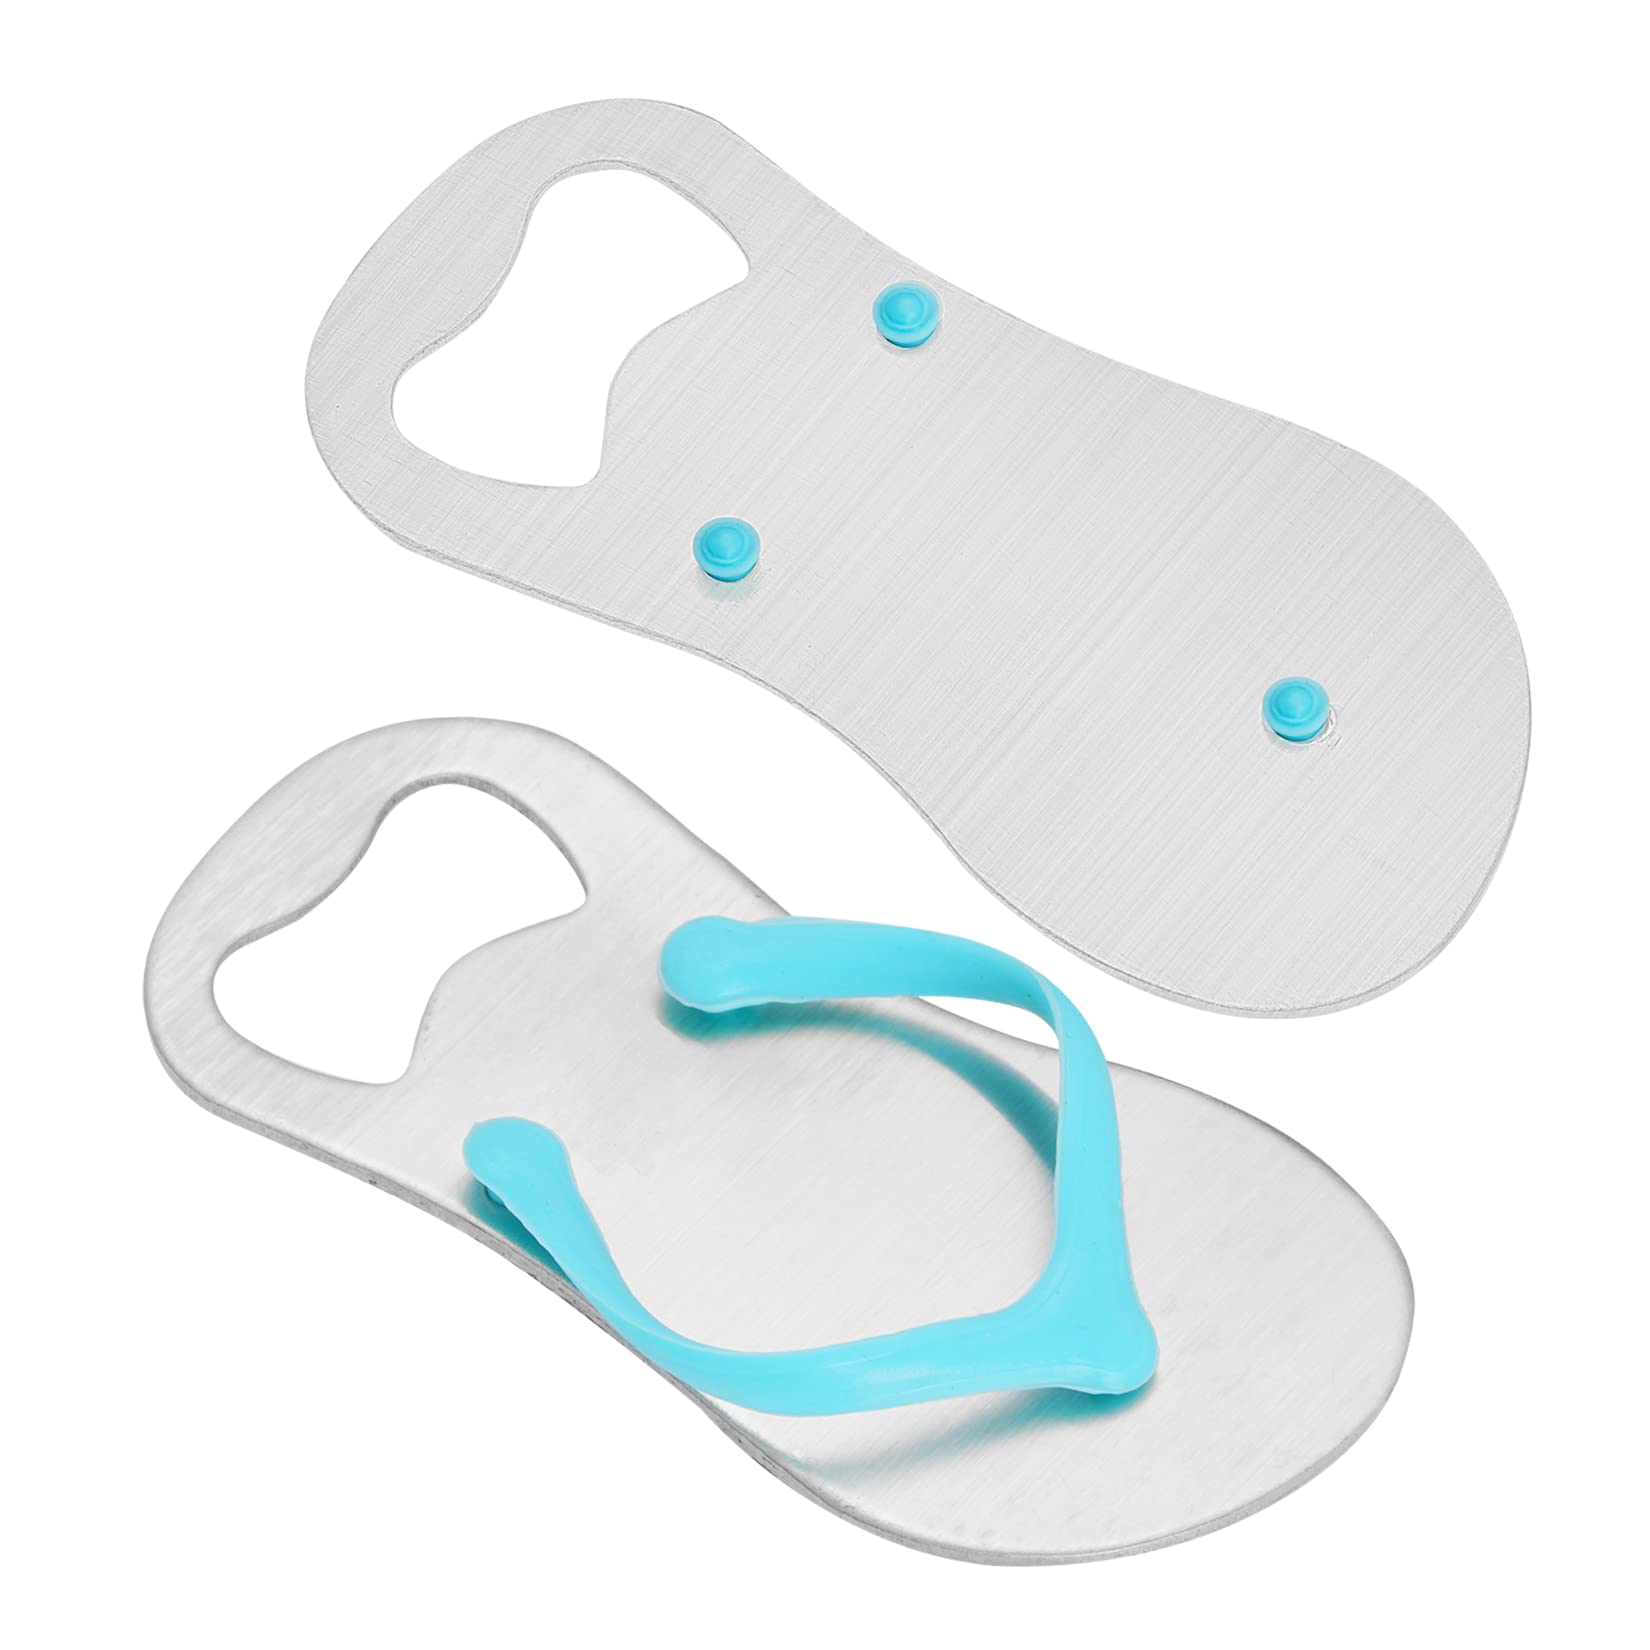 Marrywindix 8 Pack Flip-flop Bottle Openers Special "pop the Top" Slipper Bottle Opener with Gift Wrap for Wedding Summer Party Favors